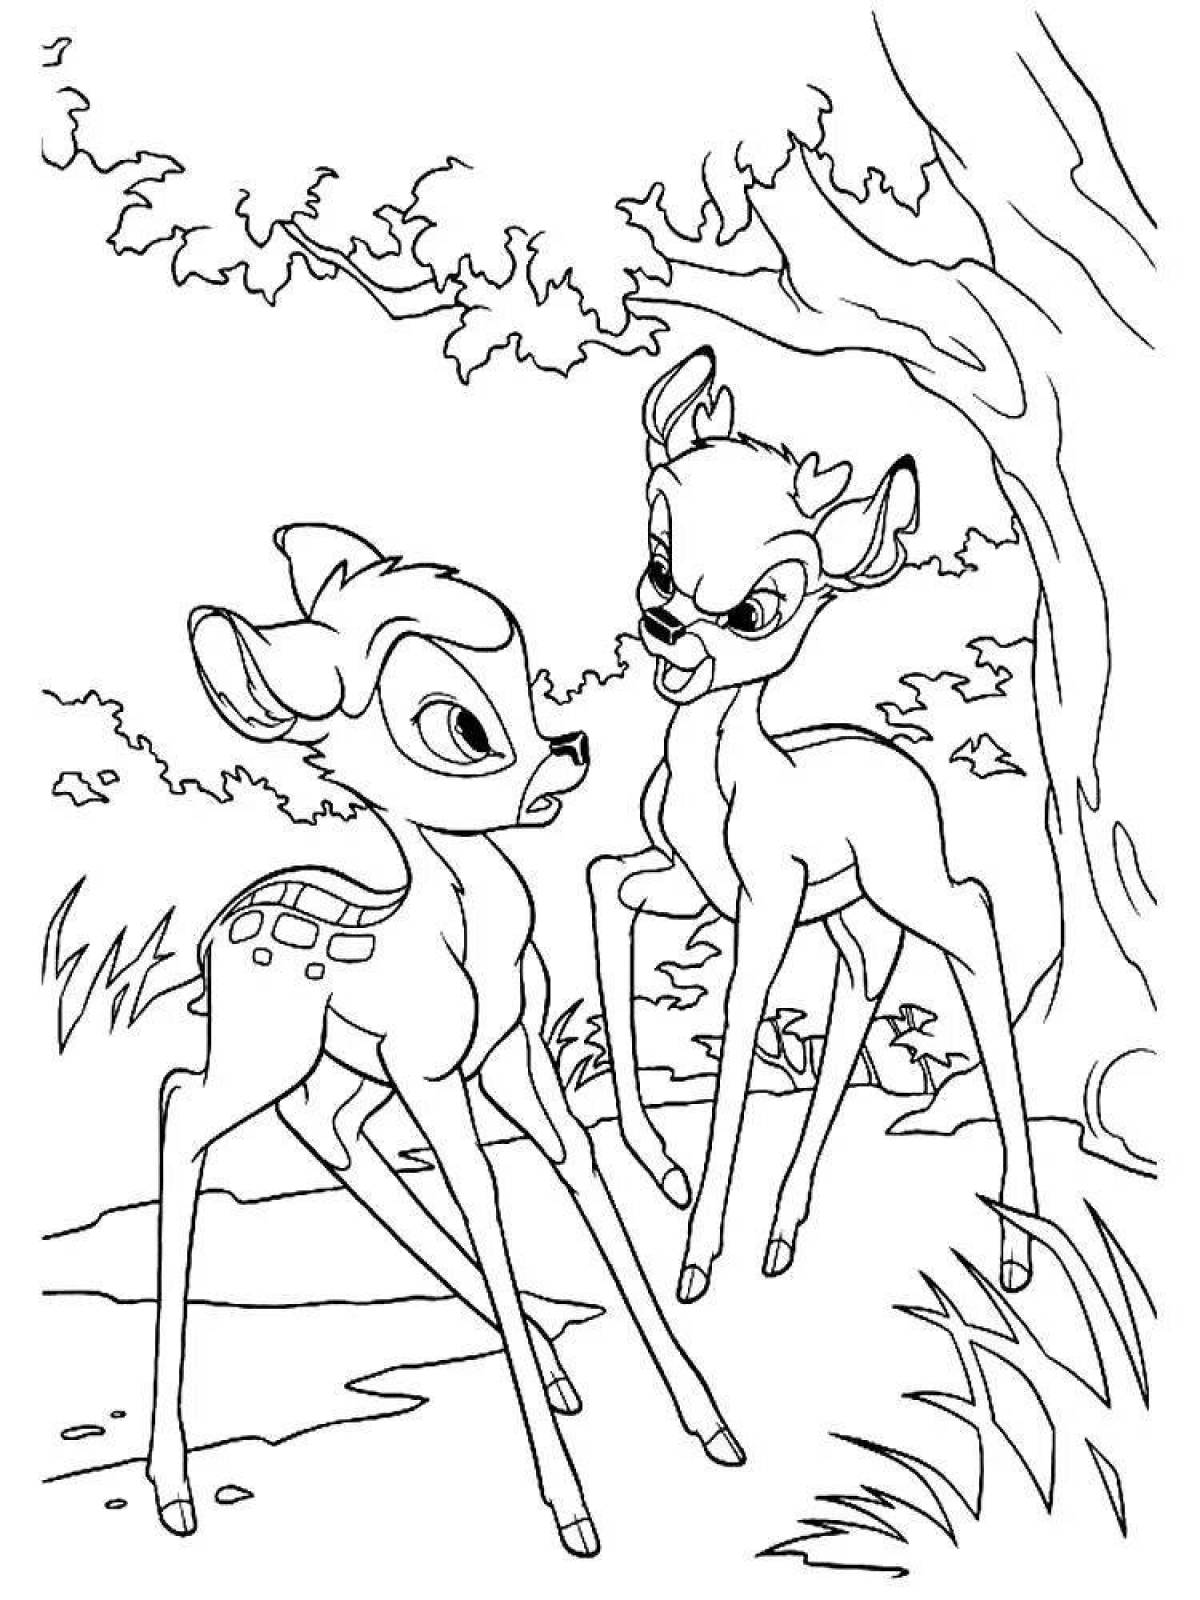 Blessed Bambi Fawn coloring page